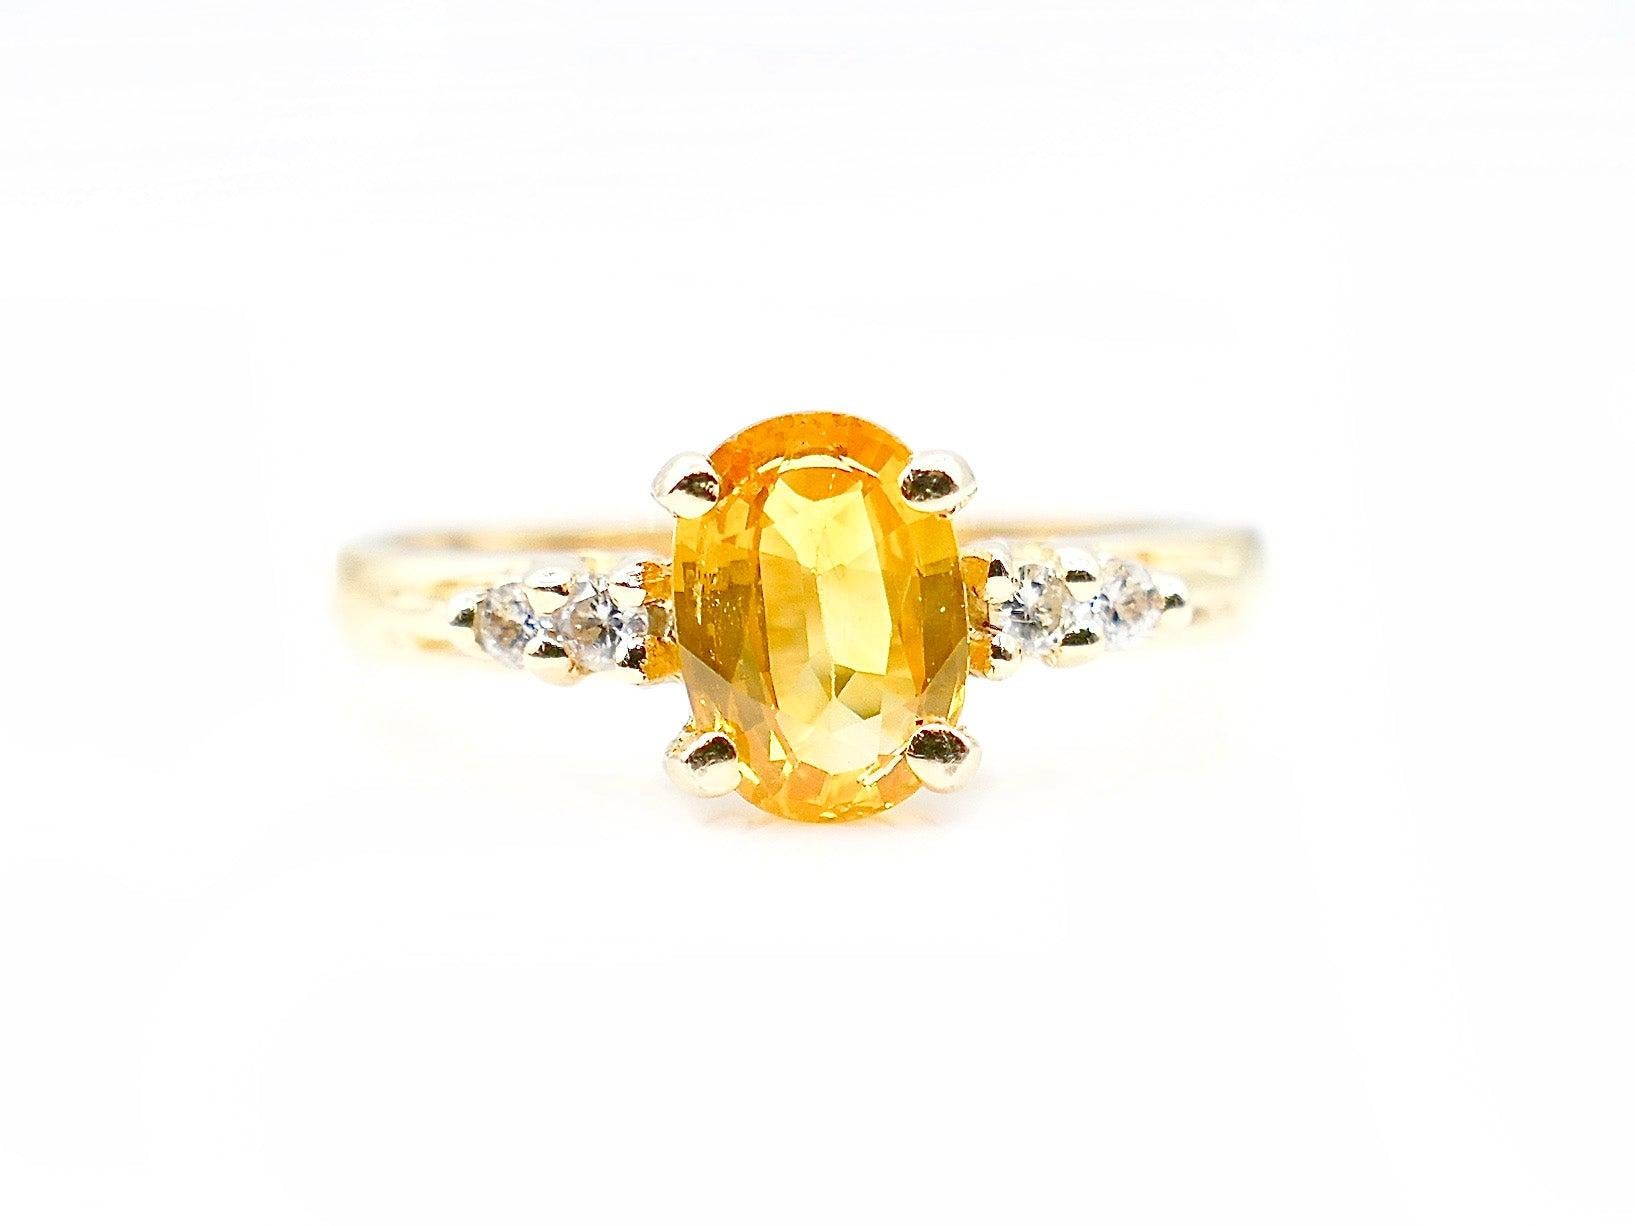 This lovely and delicate Yellow Sapphire ring is a classic piece that could be used as an engagement ring (for those couples that prefer a unique allure). The prong-set, oval Yellow Sapphire weighs in at approximately 1 Carats total and has 2 small